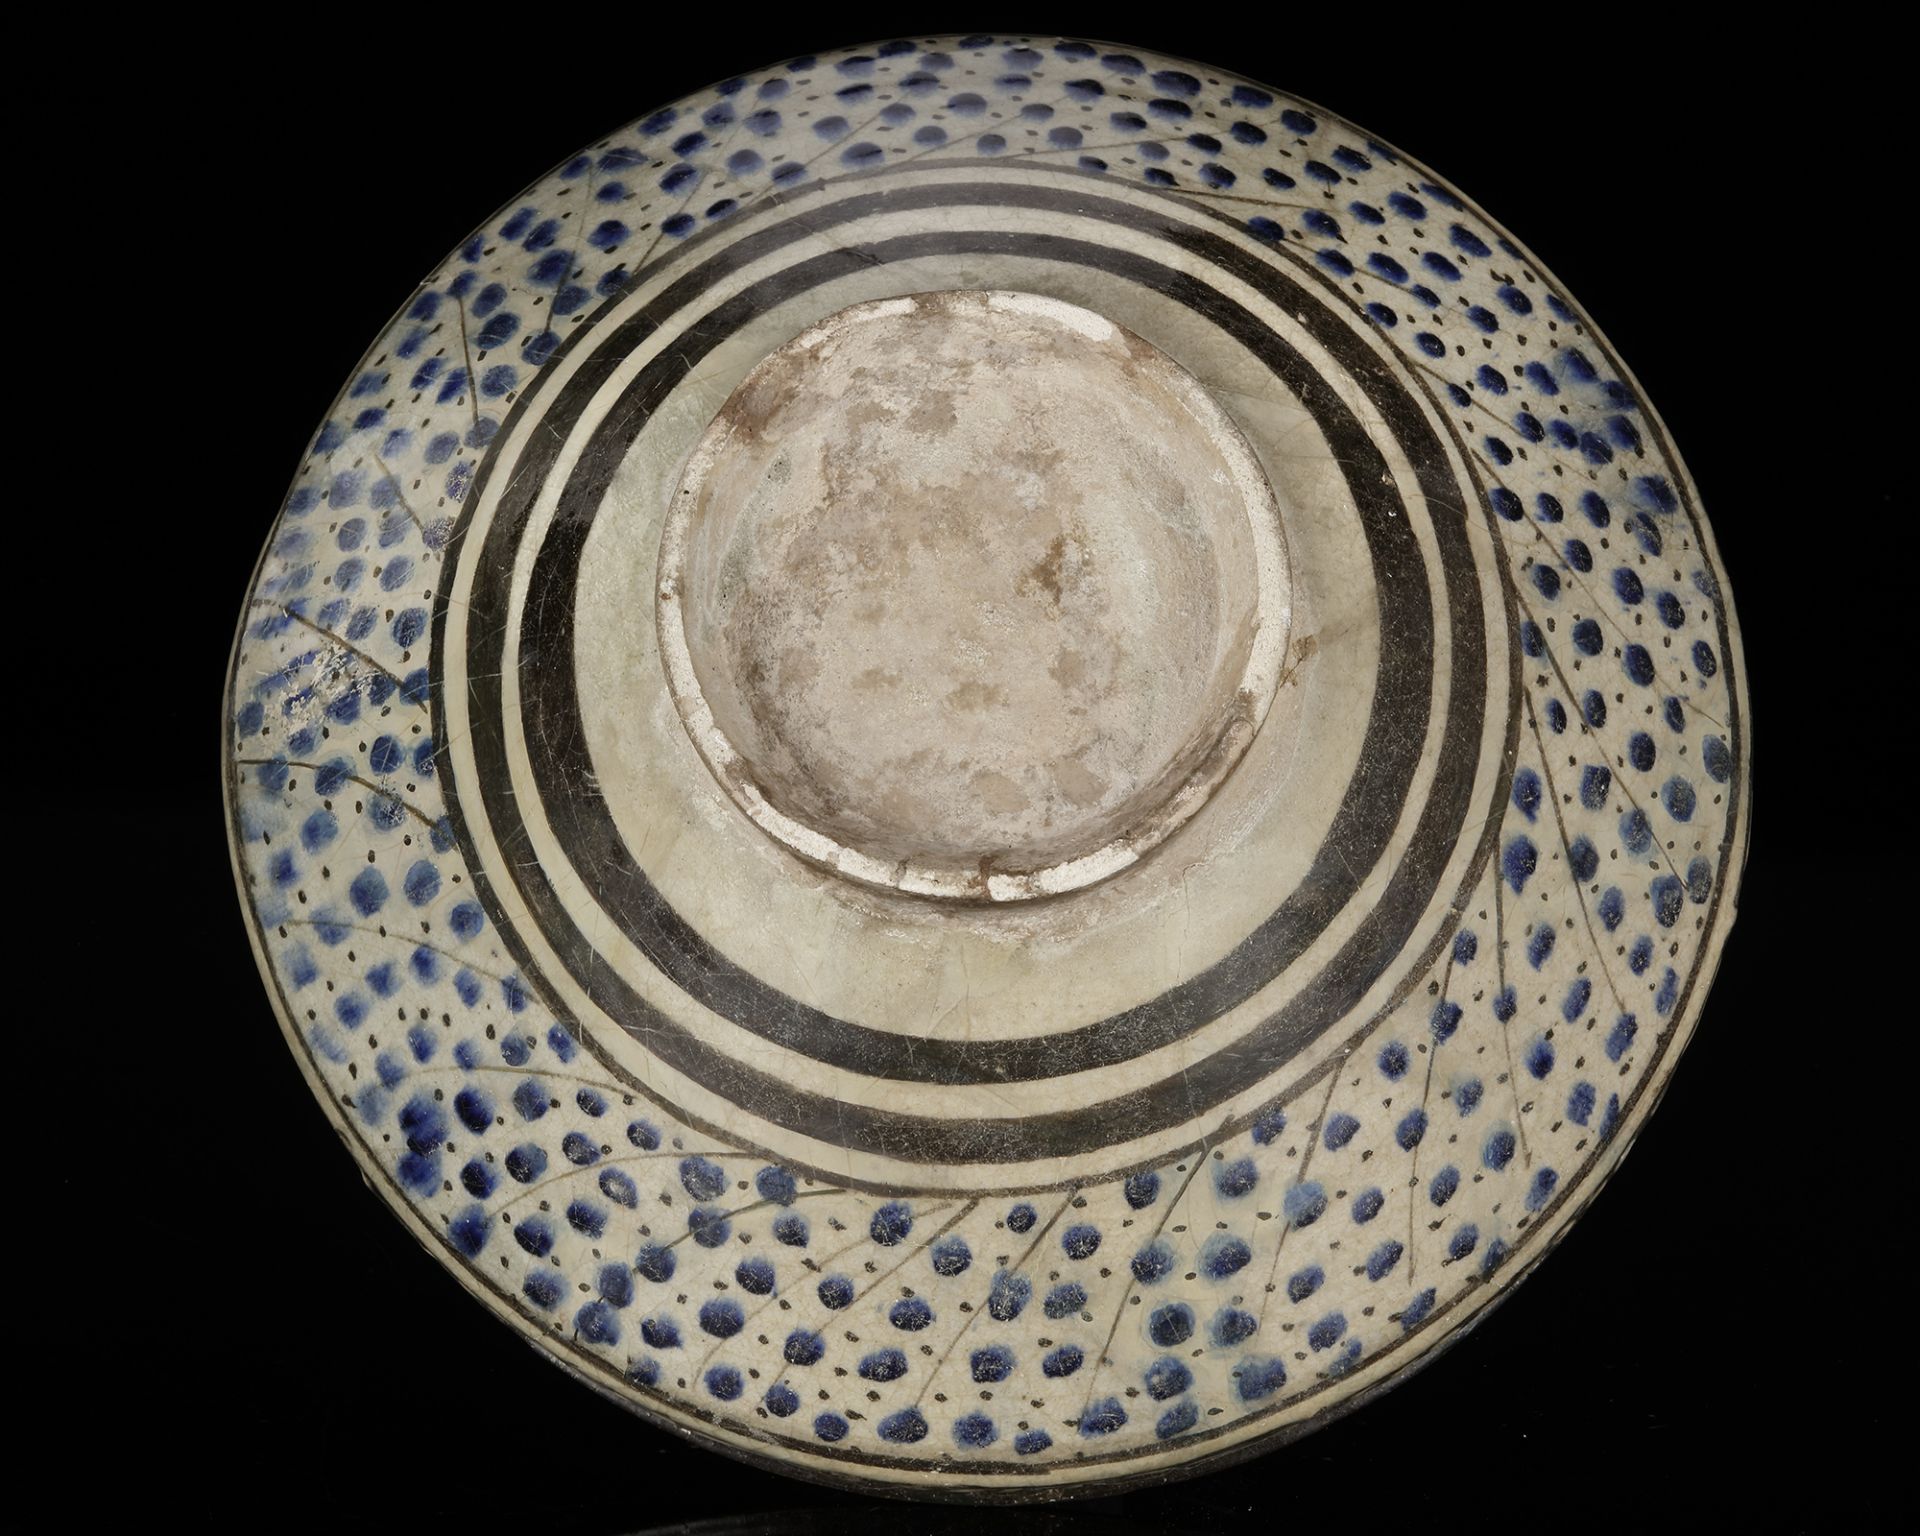 A BOWL DECORATED WITH THREE BIRDS IN FLIGHT, SULTANABAD, 13TH-14TH CENTURY - Image 4 of 4